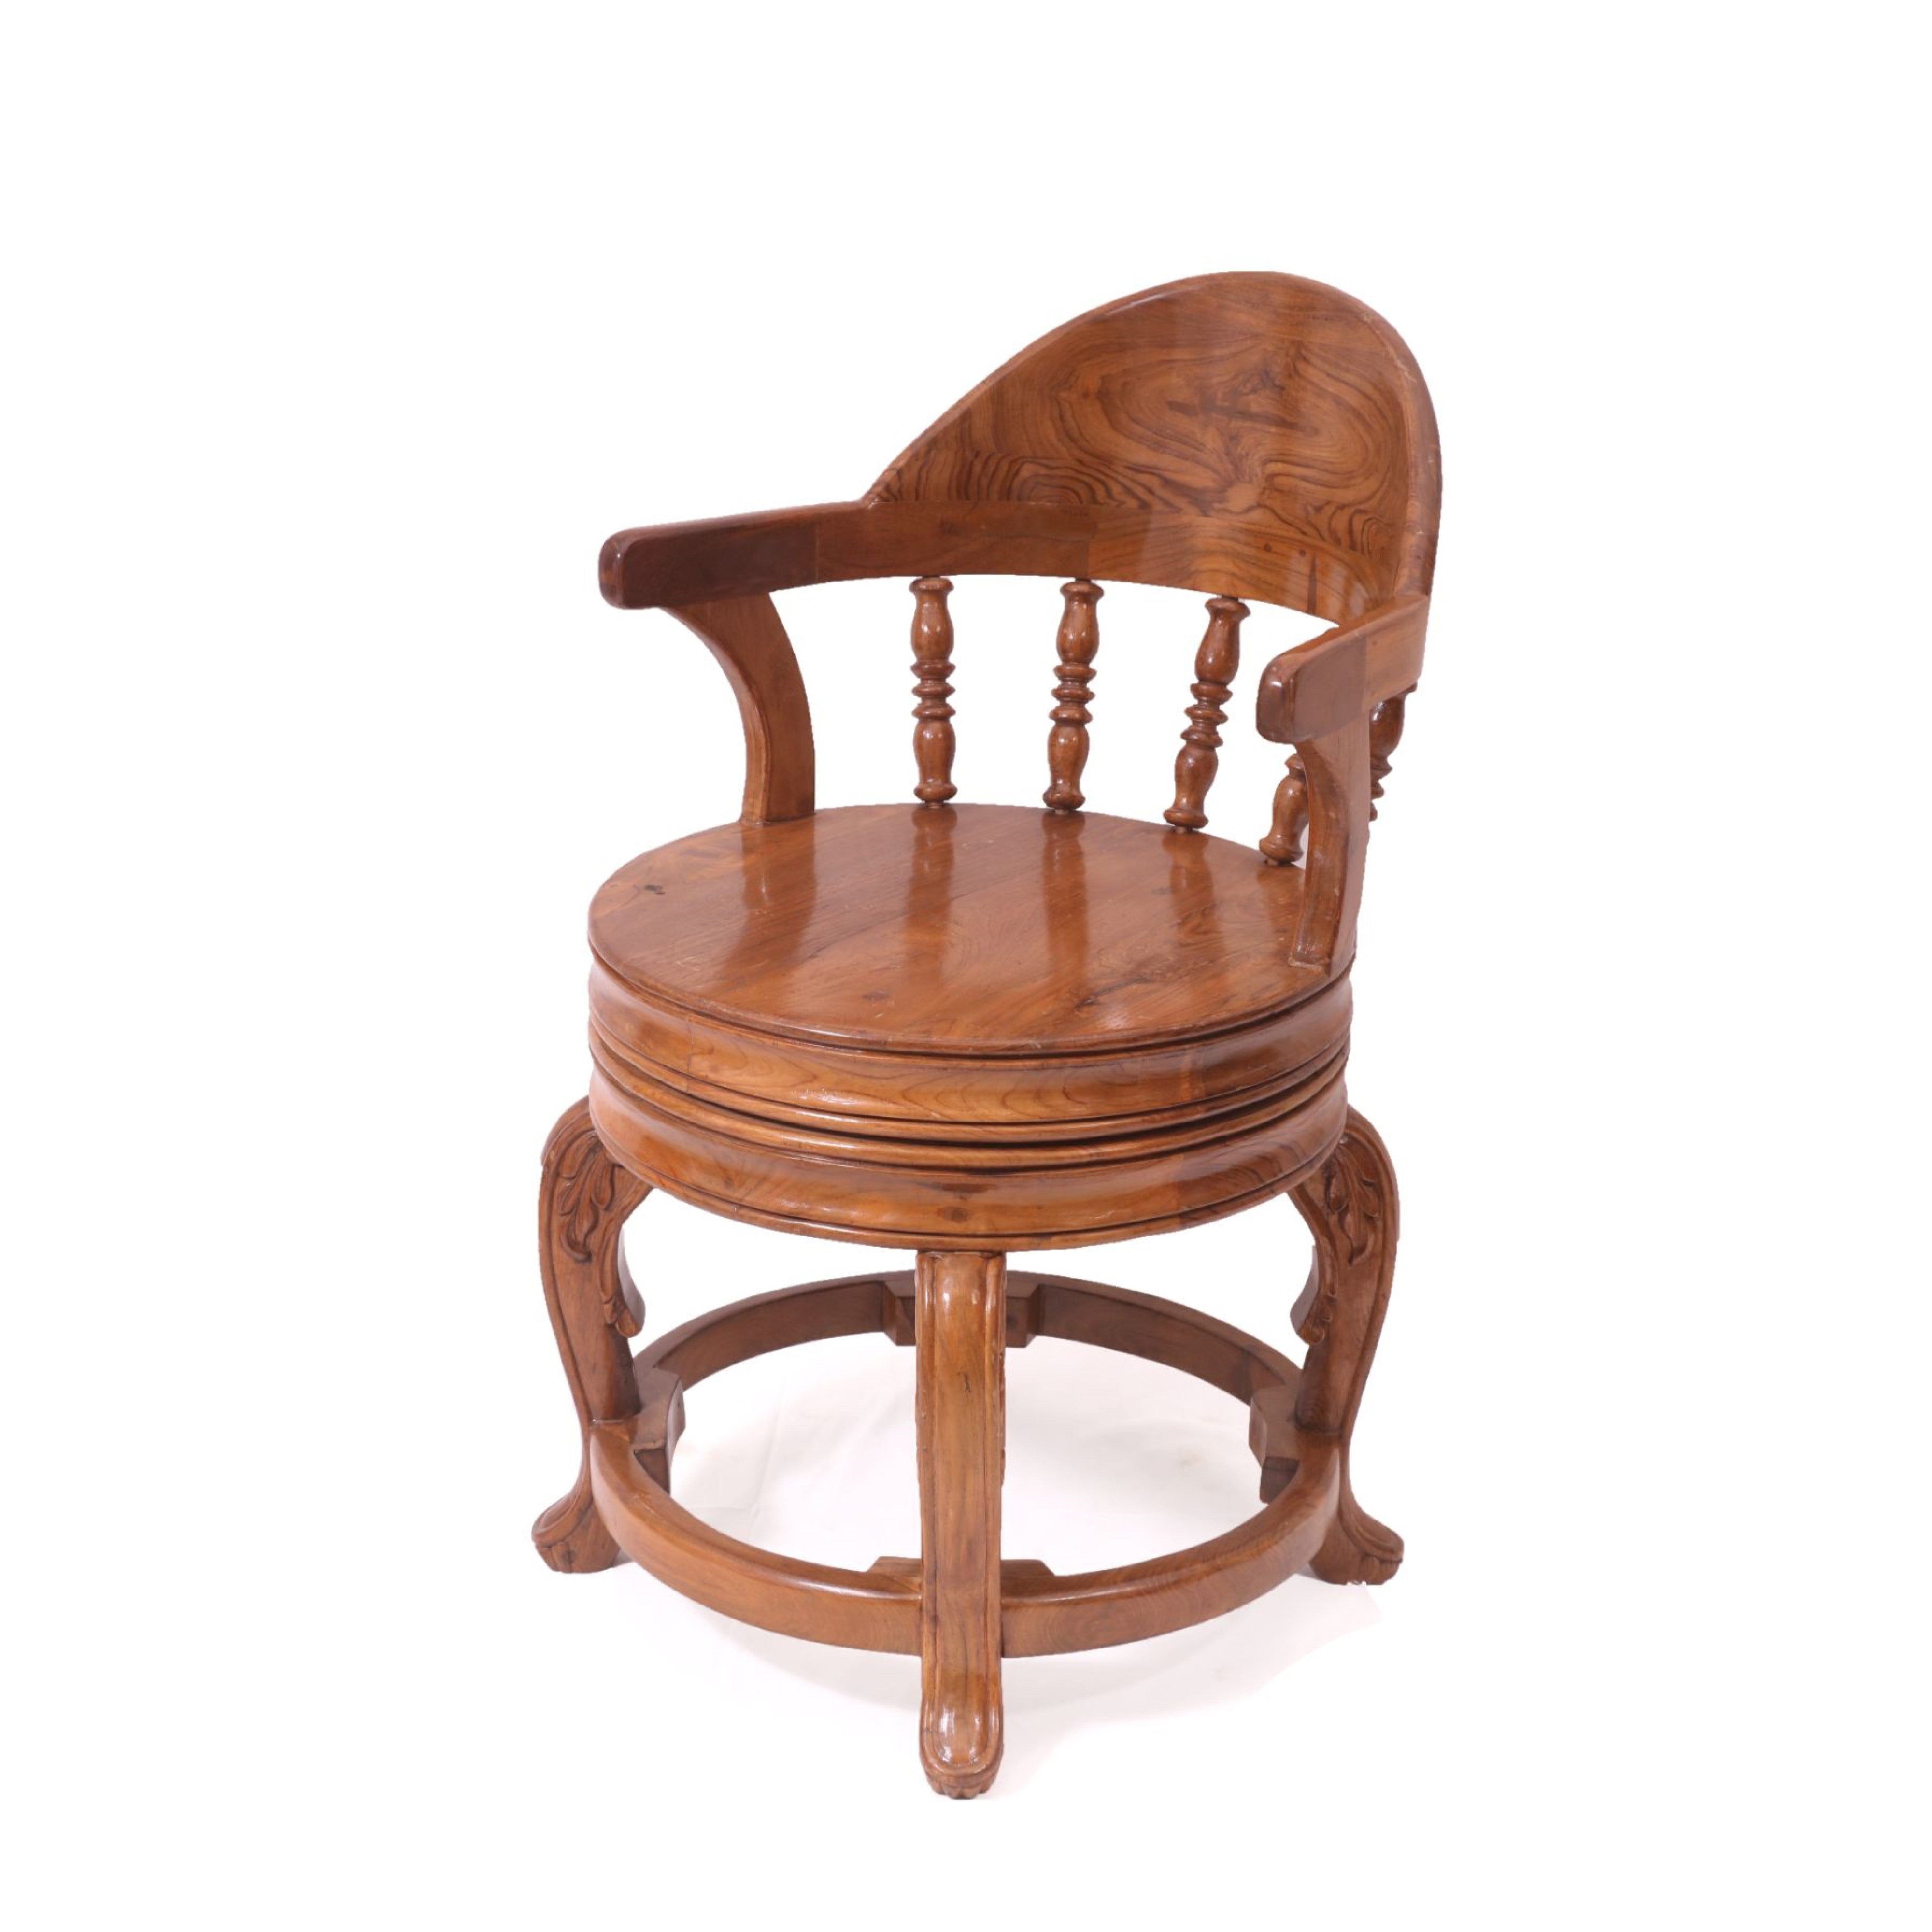 Rounded Carved Wooden Chair Arm Chair